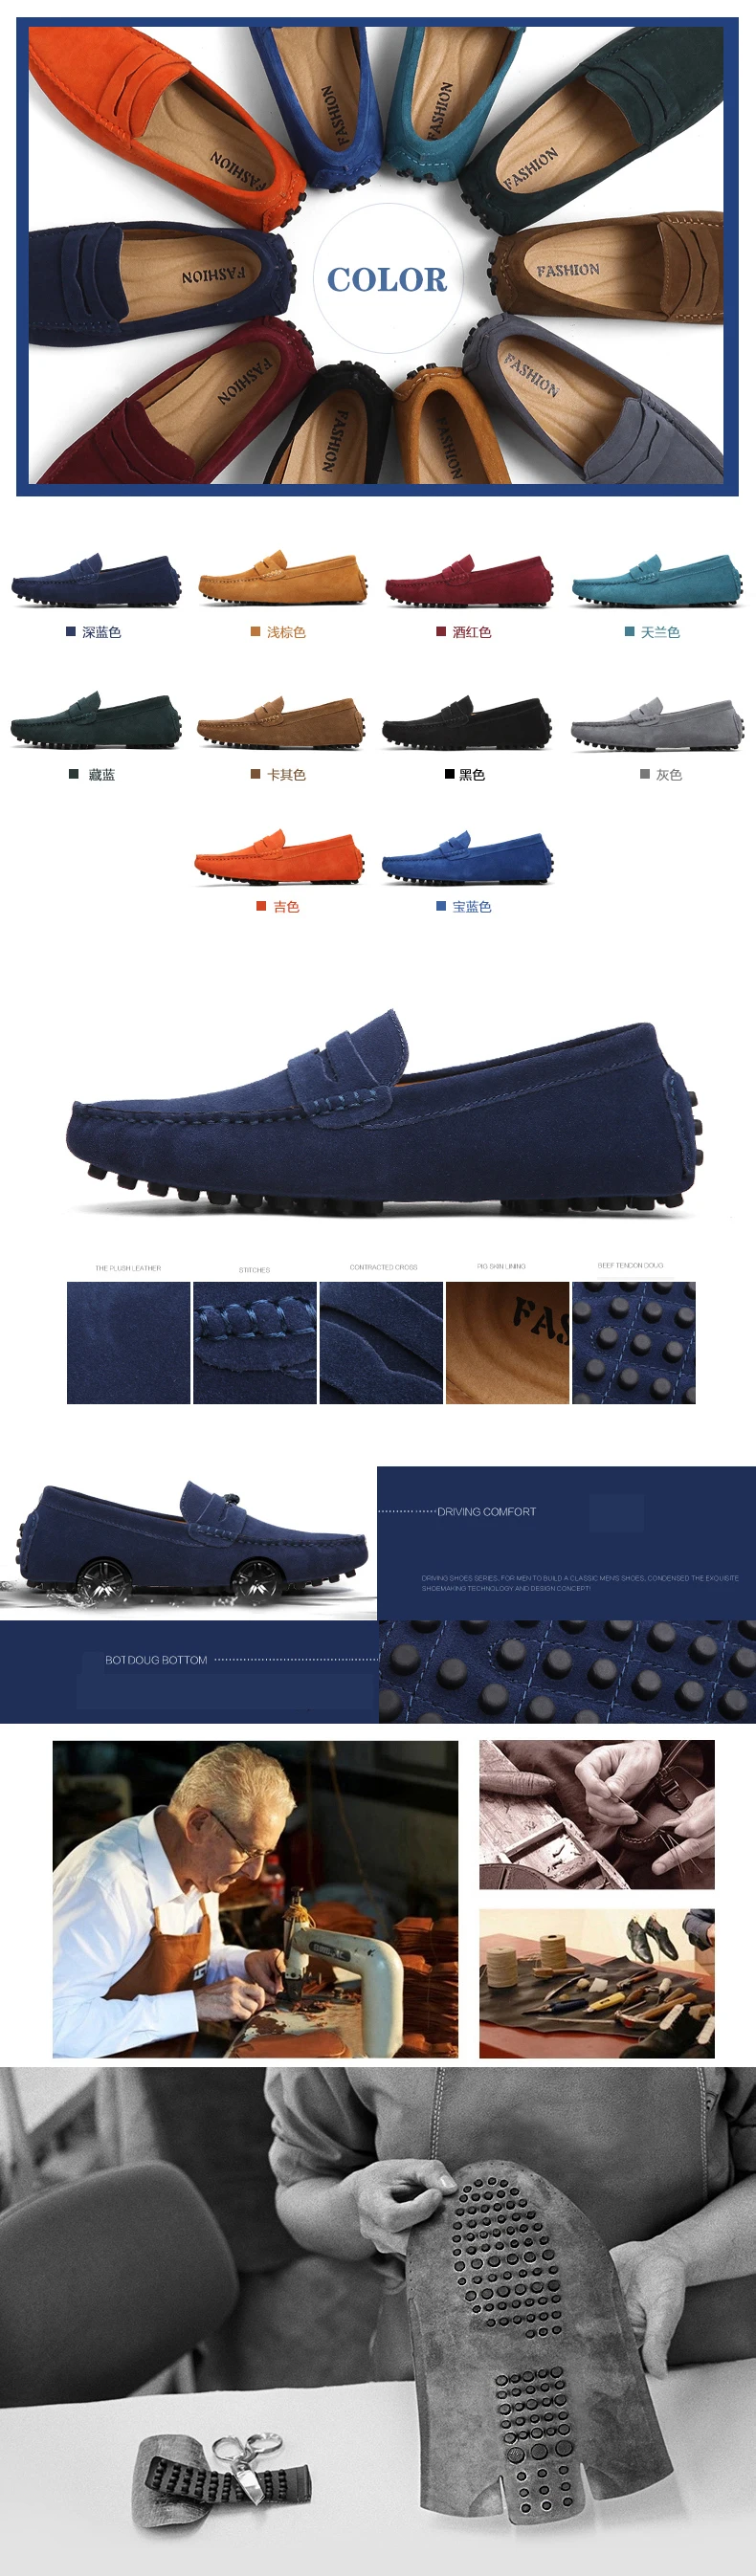 Mocassin Loafers Shoes Men Other Trendy Loafer Boat Shoes Cheap Suede ...